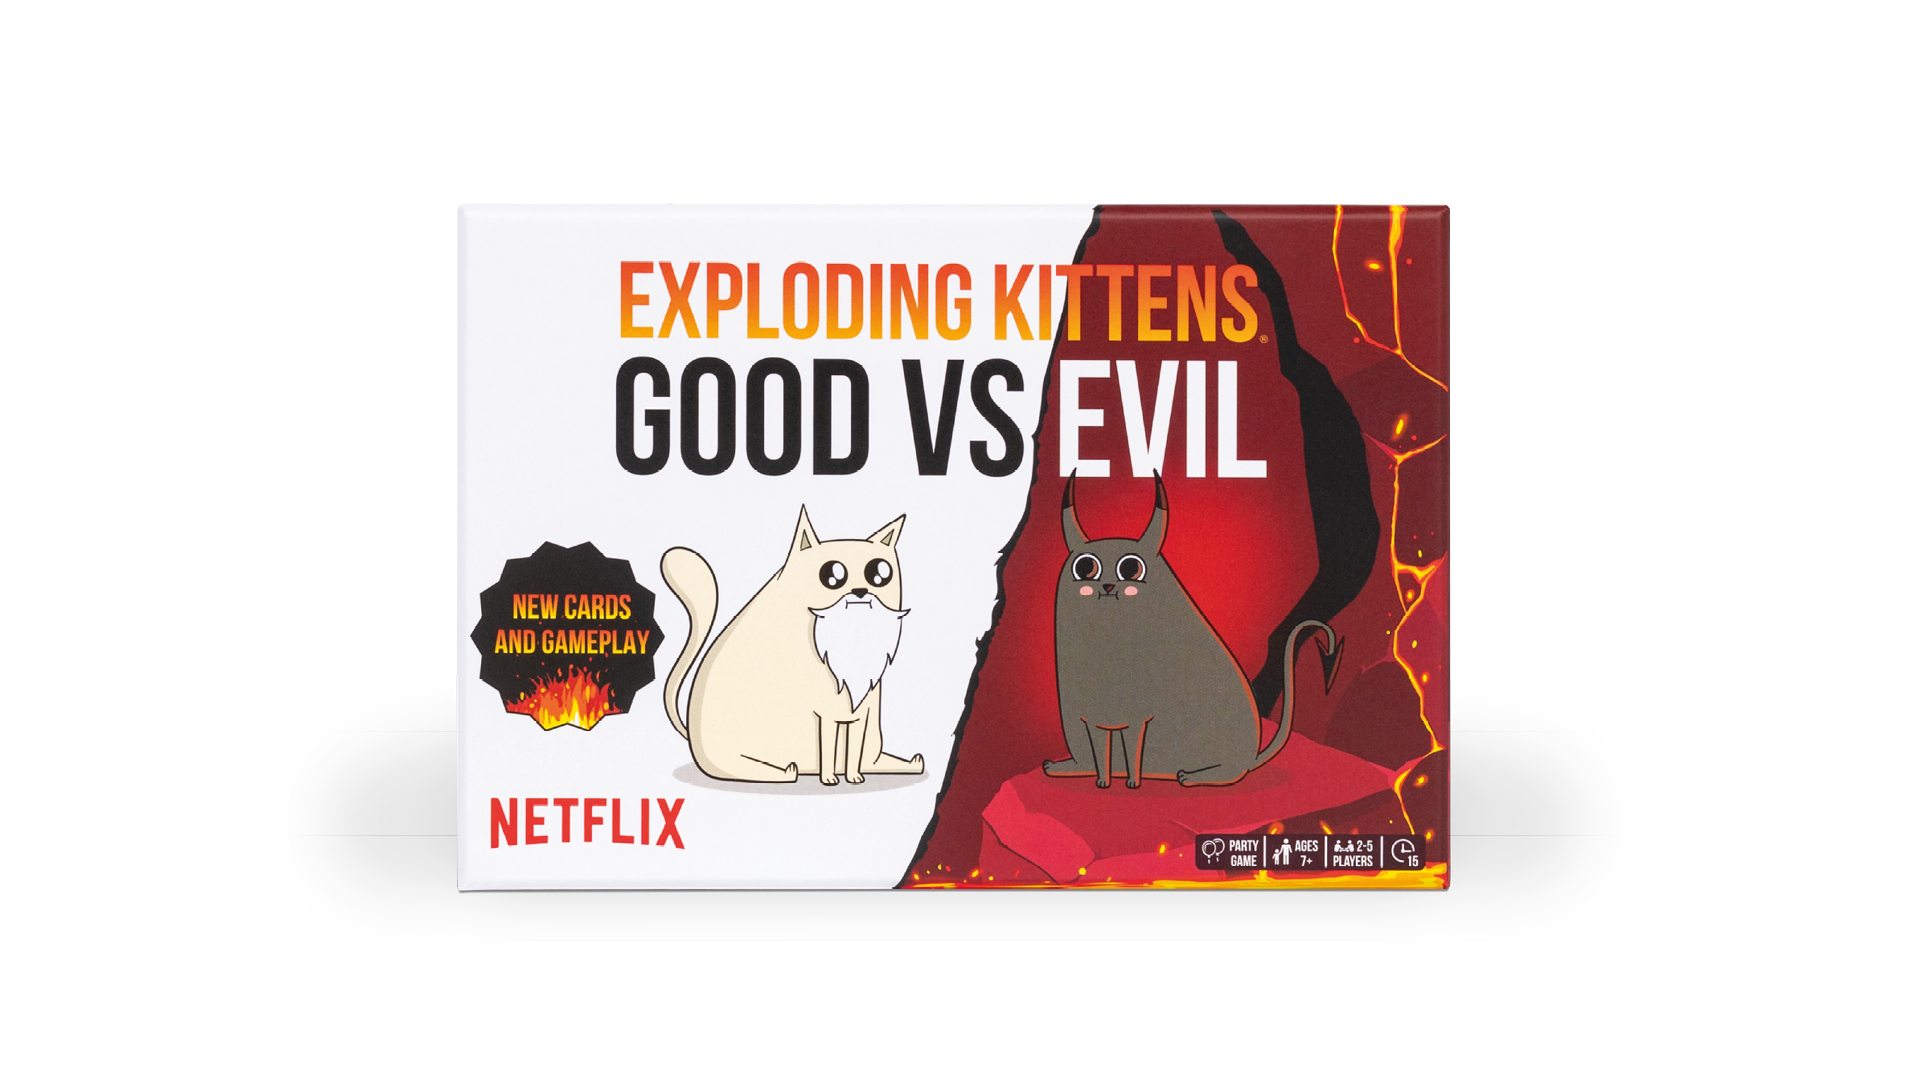 Exploding Kittens Launches New Card Game